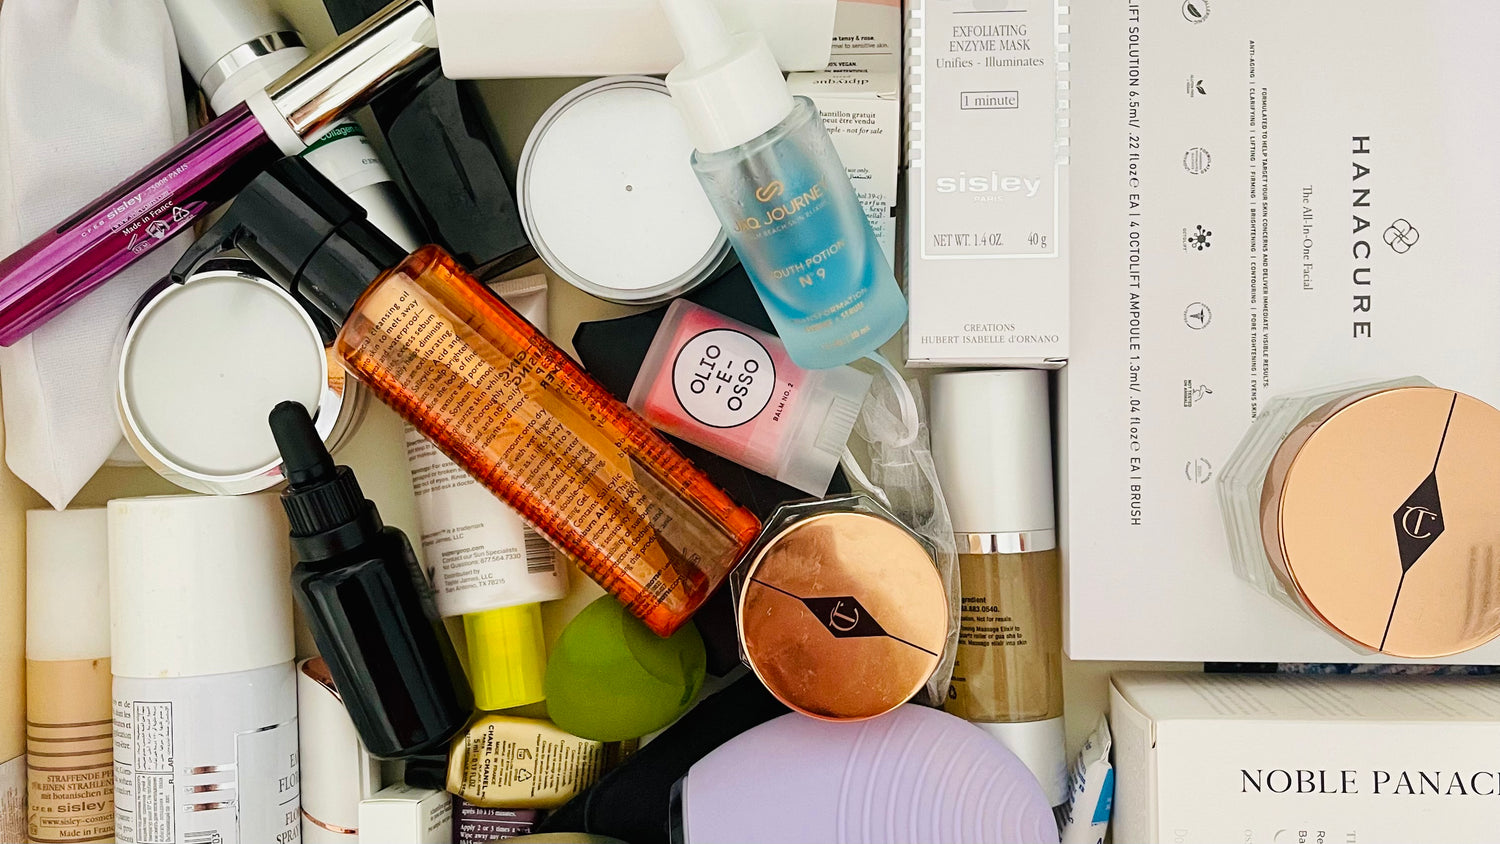 Spring into Beauty: 10 “Must-Do” Tips to Revamp Your Skincare and Makeup Drawer!"